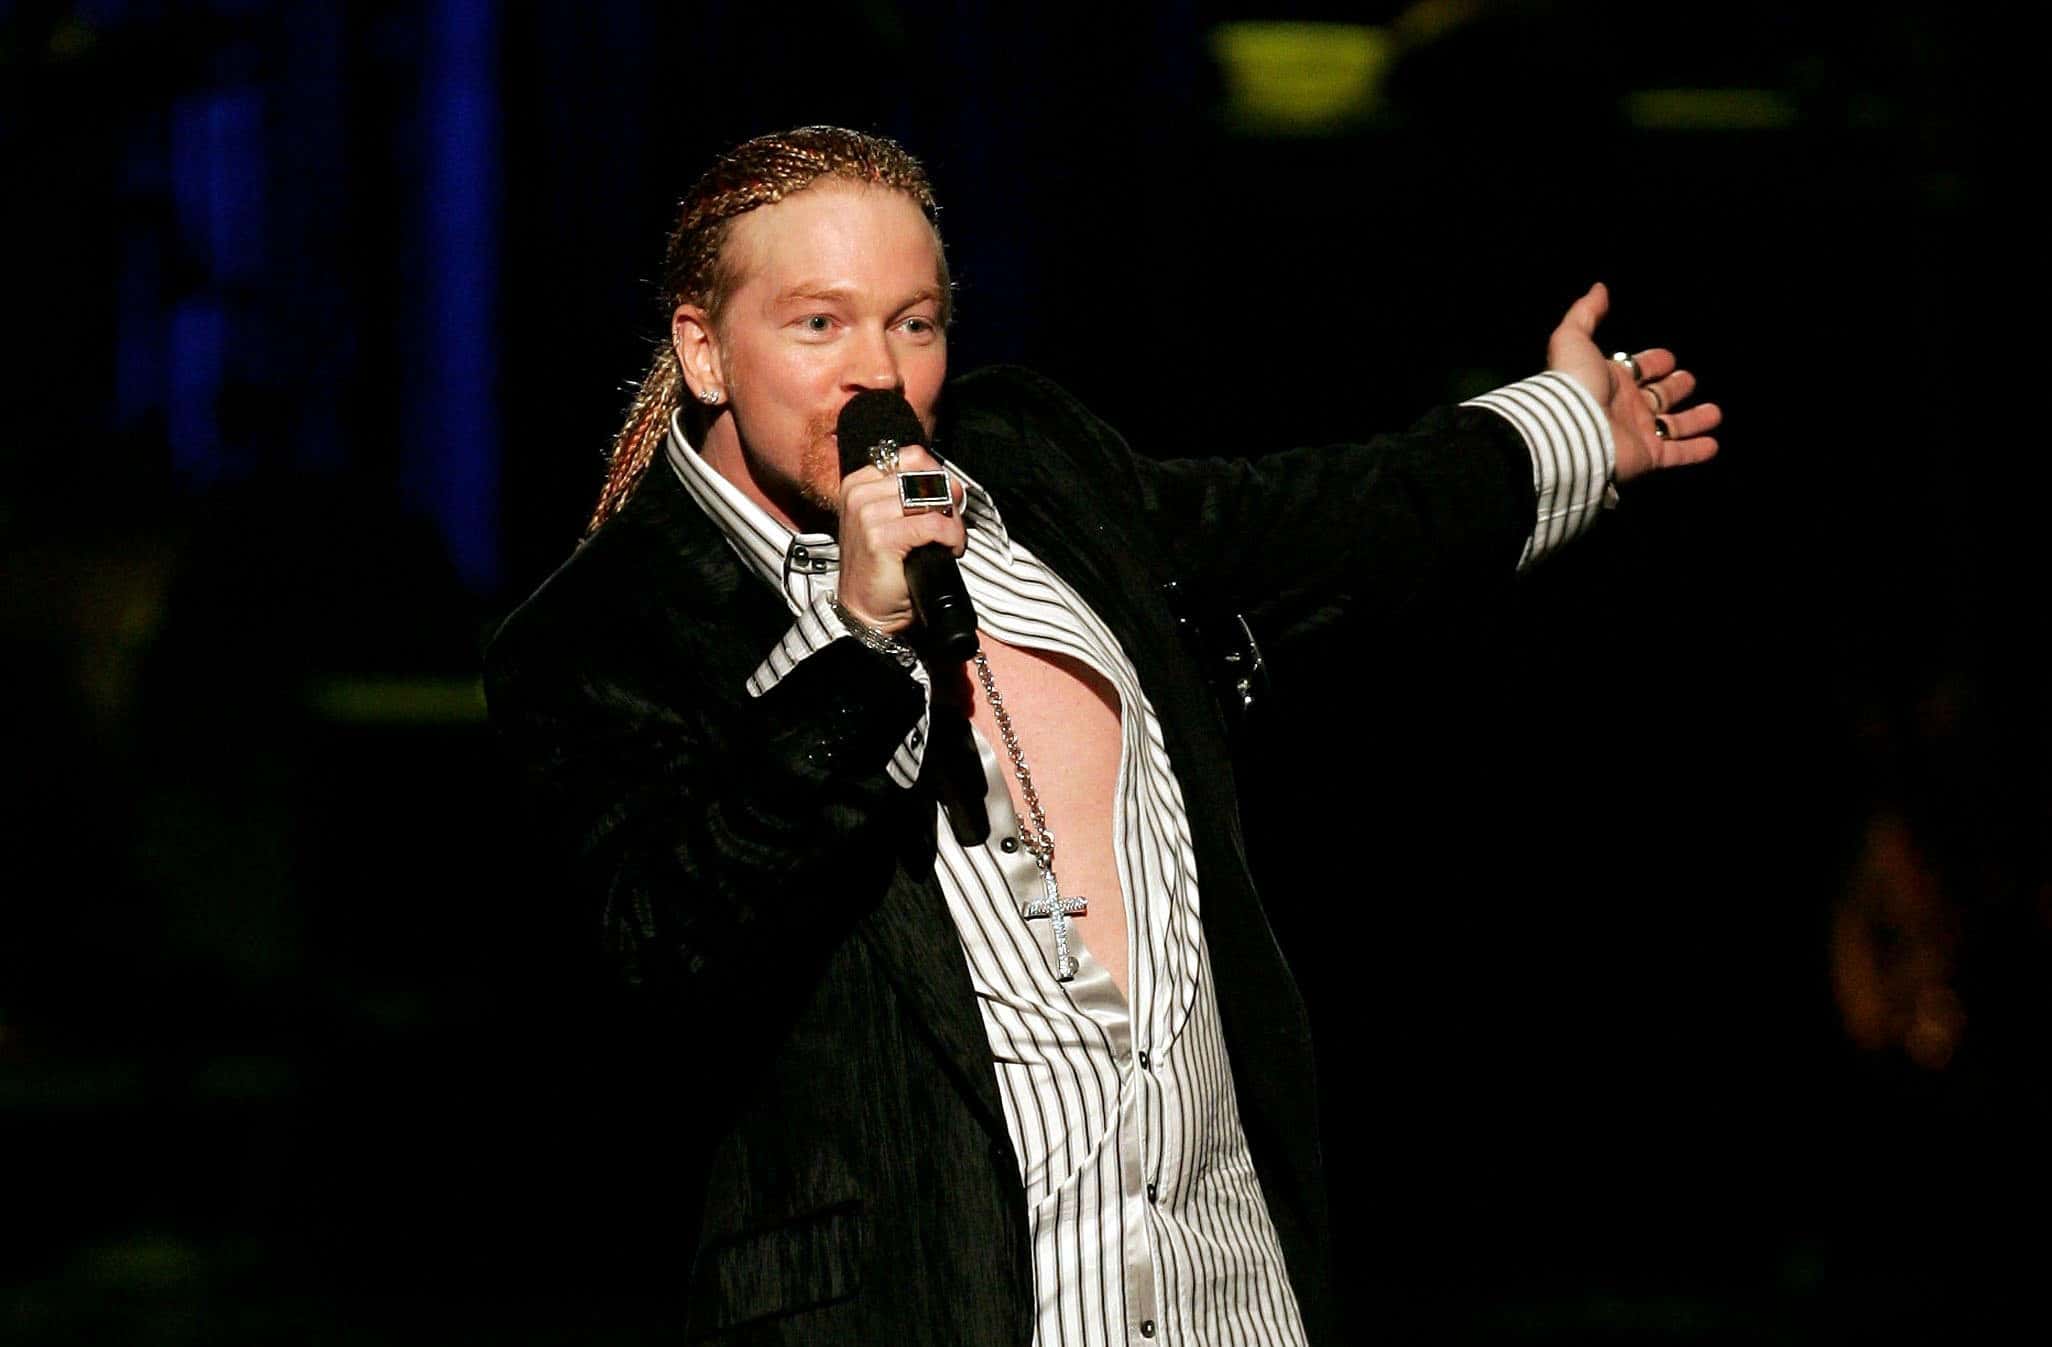 <p>In 1988, Guns N’ Roses released the single “One in a Million,” which was based on Axl Rose’s less-than-pleasant experience coming to Los Angeles for the first time. However, the song provoked a huge controversy due to Rose's use of anti-gay language and the N-word in the song. For his part, Rose did an interview with <em>Rolling Stone</em> to address the controversy. He embarked on a rant which began with him resenting the idea he can be told what to say or not say. He then claimed that the N-word “doesn’t necessarily mean black” before pointing out that rap group N.W.A. used it all the time and no one got angry at them. Finally, presumably, because nobody was looking him in the eye by that point, Rose called out Bobcat Goldthwait for insisting that the band used the N-word just for the sake of controversy. It’s safe to say that “One in a Million” isn’t hailed as a Guns N’ Roses classic.</p>